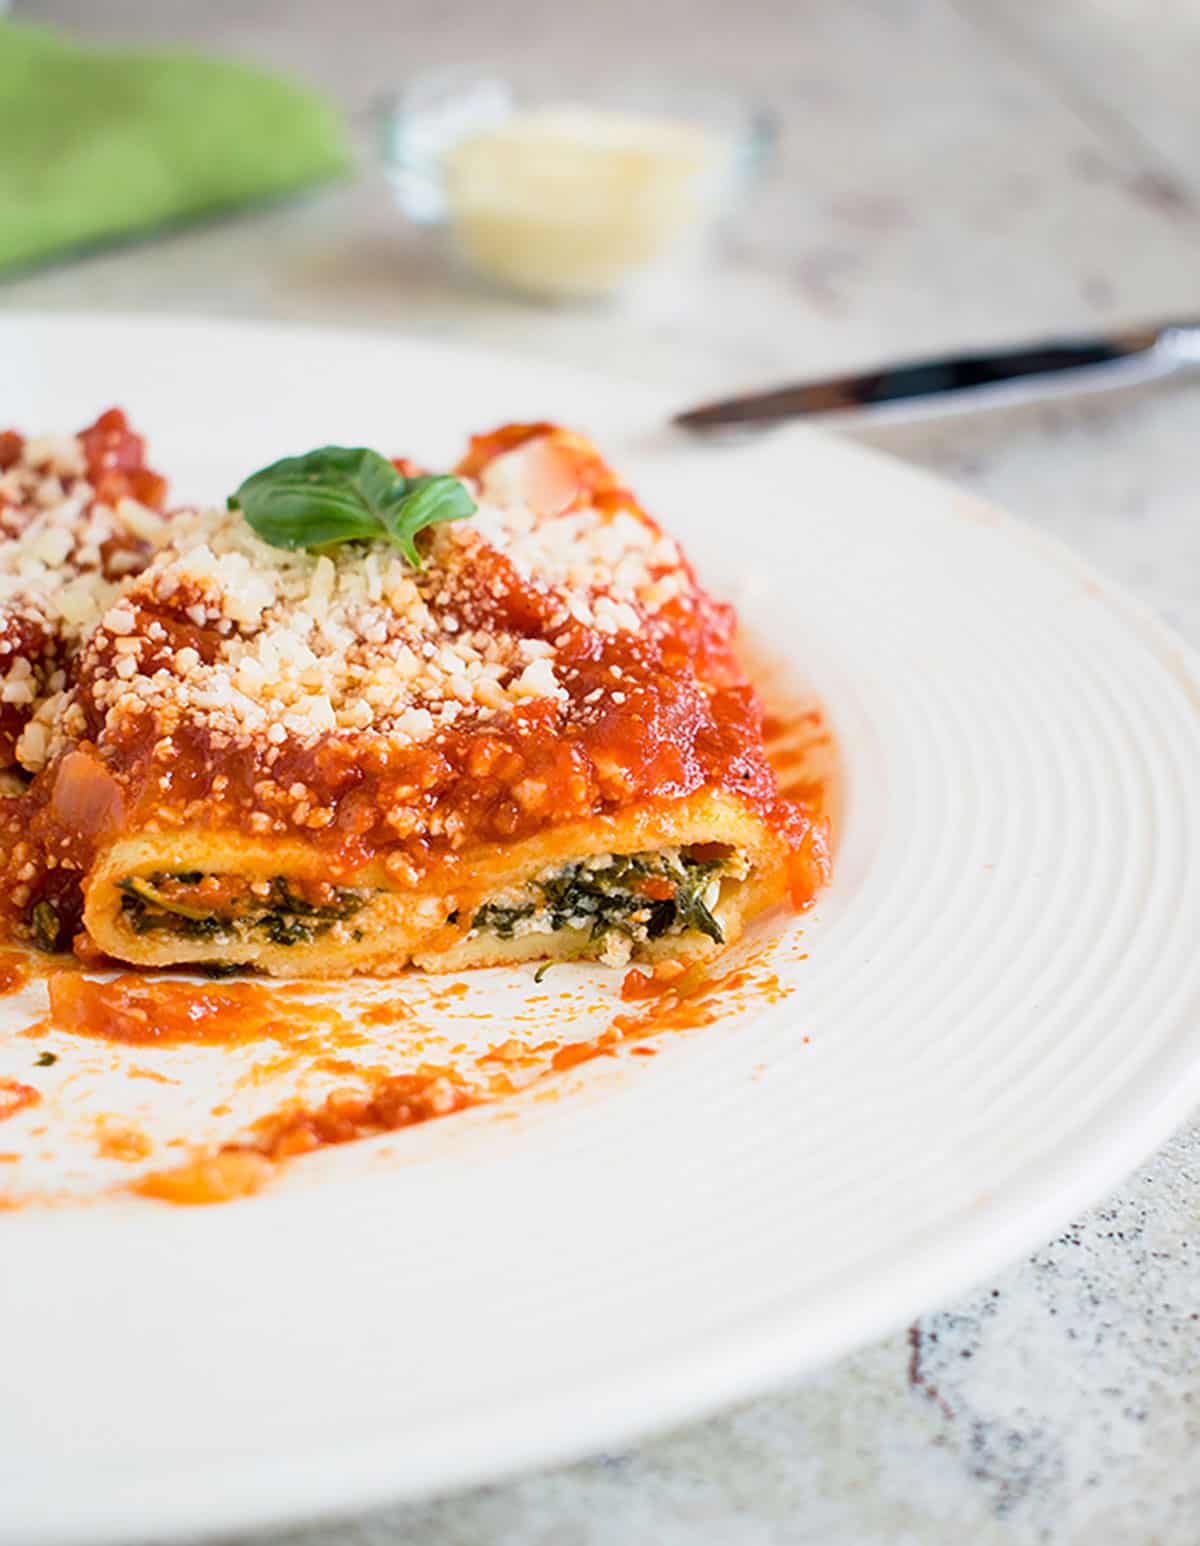 Mm Tablet Warrior Homemade Manicotti with Crepes (Crespelle) - Cooking with Mamma C